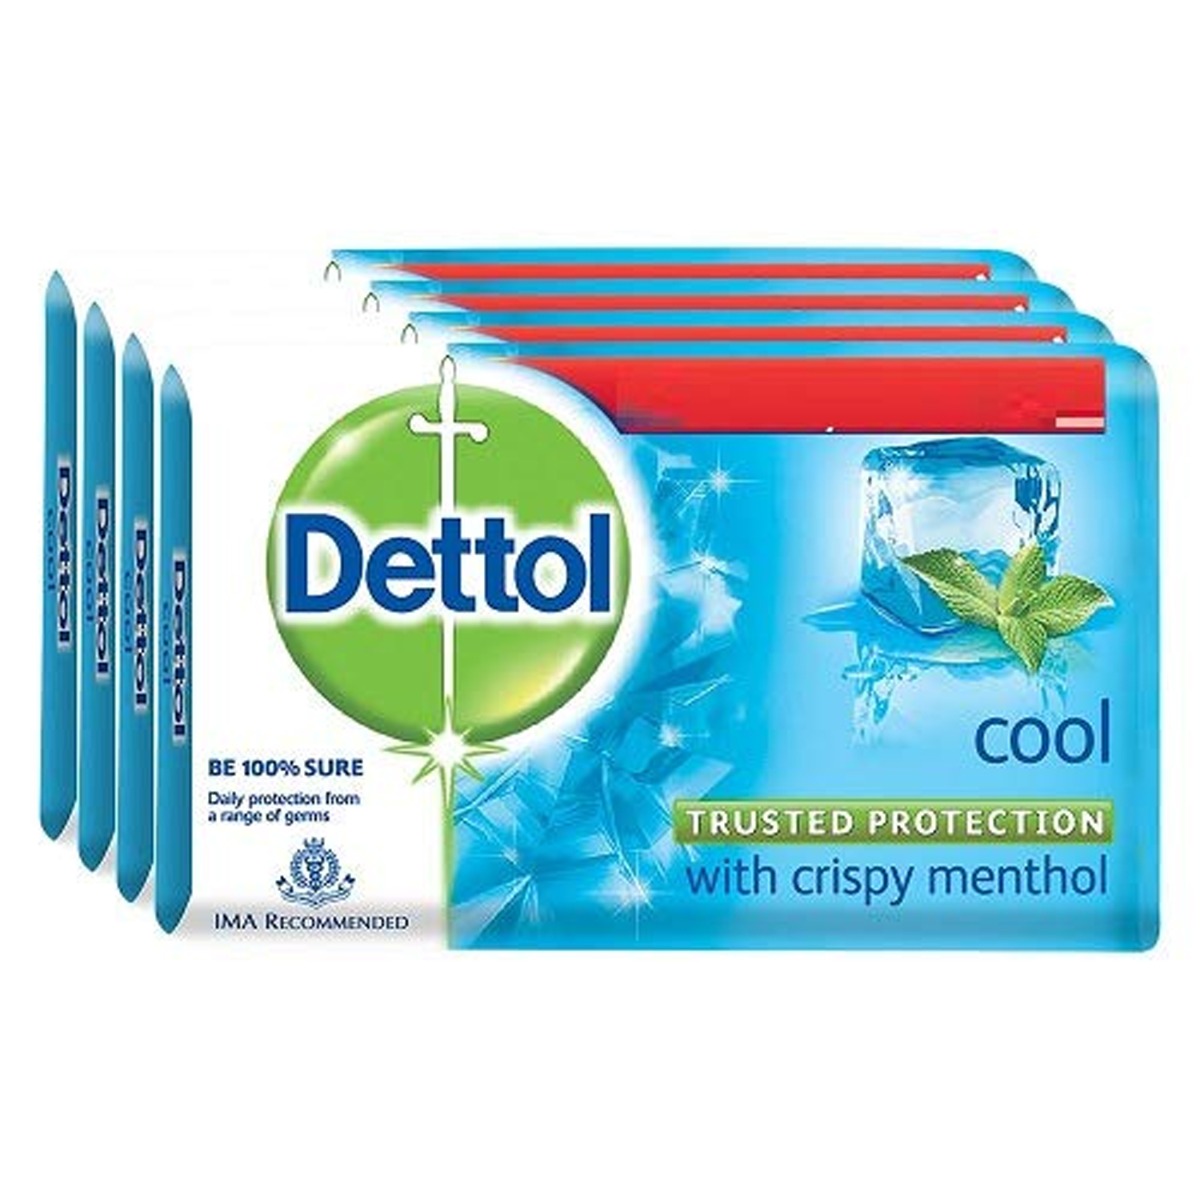 Dettol Cool Soap - Pack of 4, 75gm each